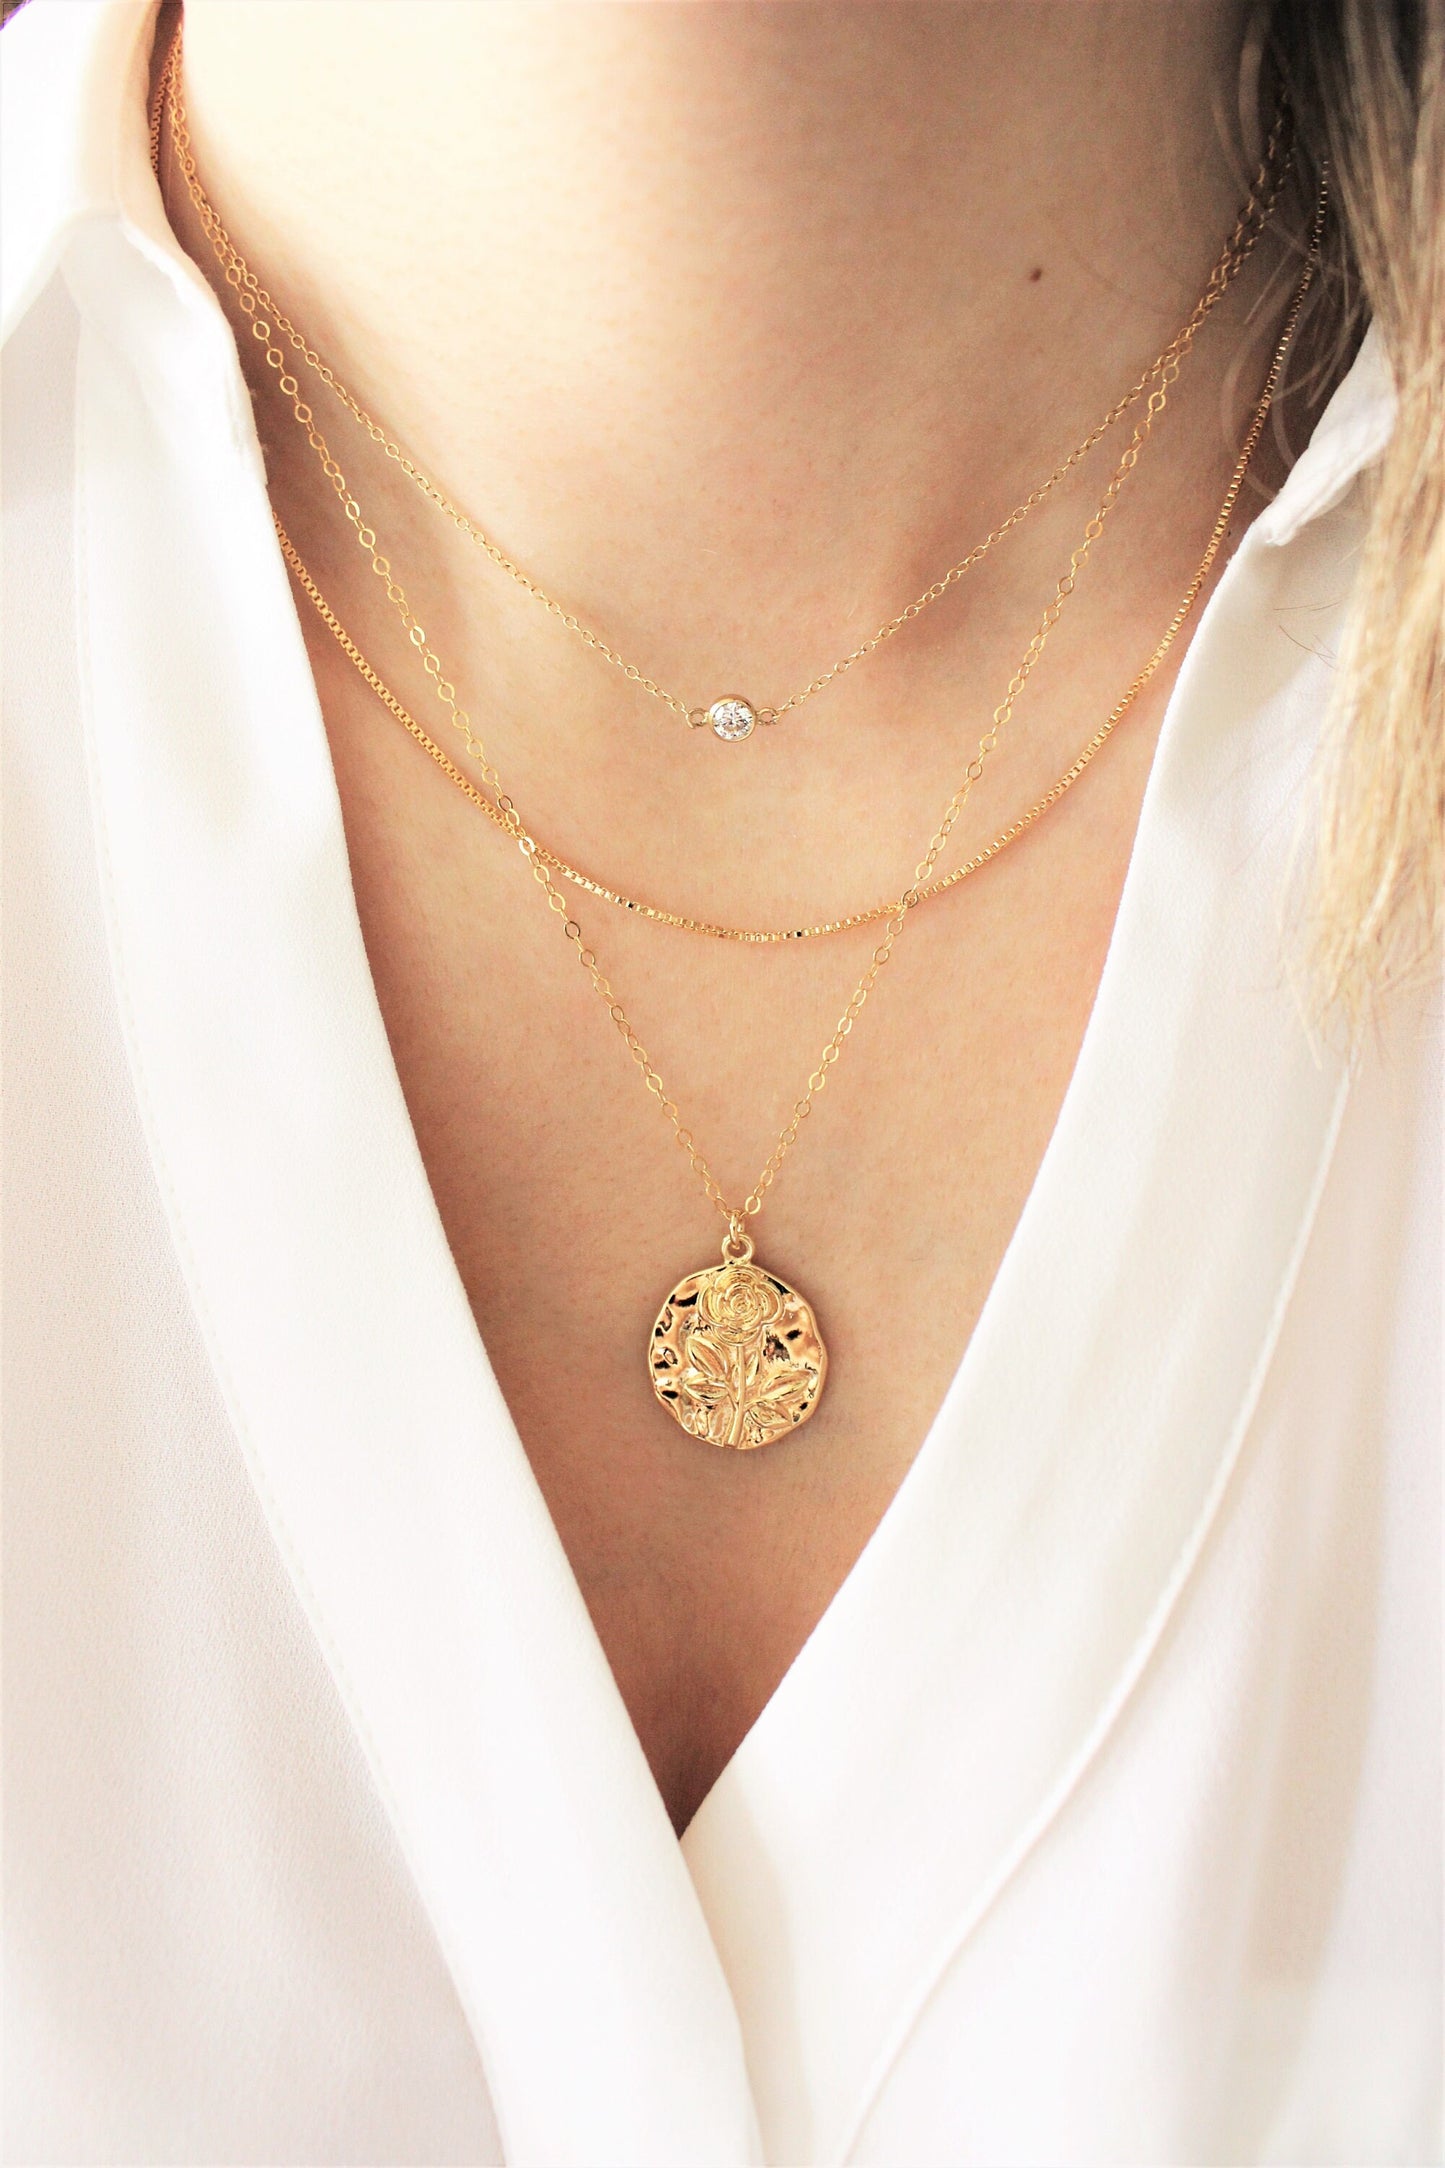 Rose Medallion Pendant Necklace ∙ 14K Gold Filled Chain, Coin, Flower Jewelry, Minimalist, Dainty Vintage Rose Gift for Her